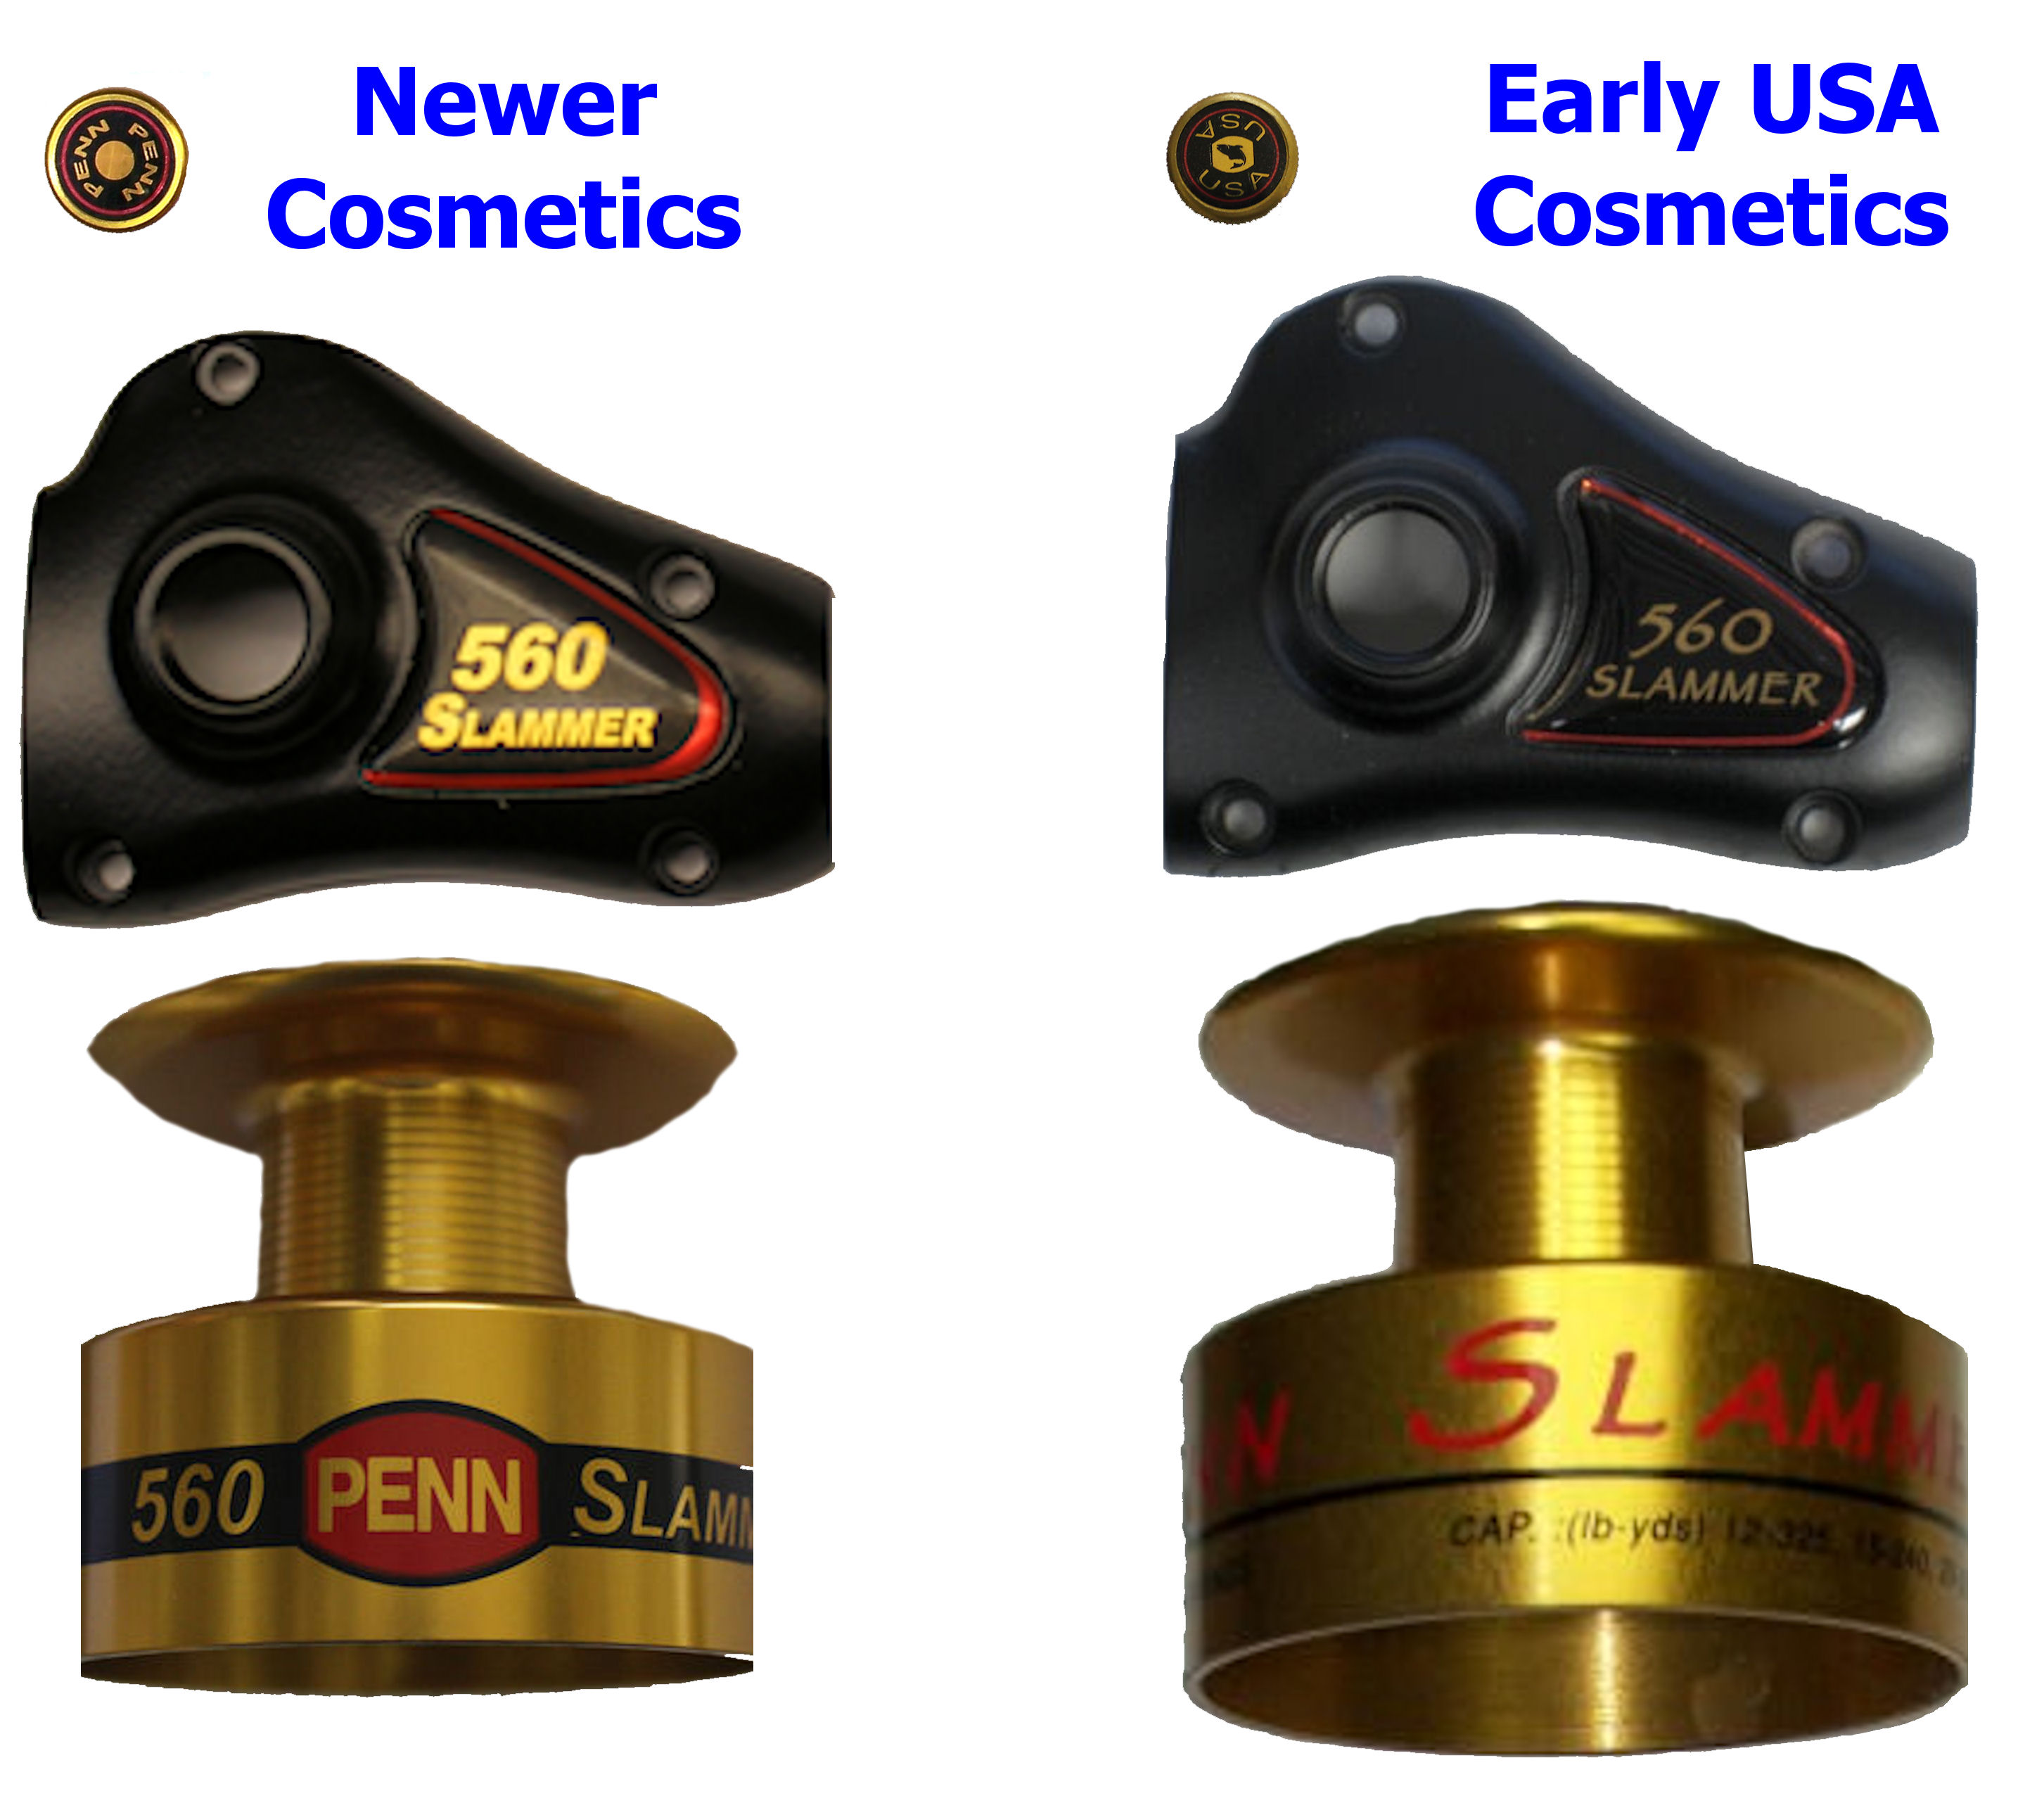 Penn Slammer Series Reel Cosmetic Changes between USA and China made reels.